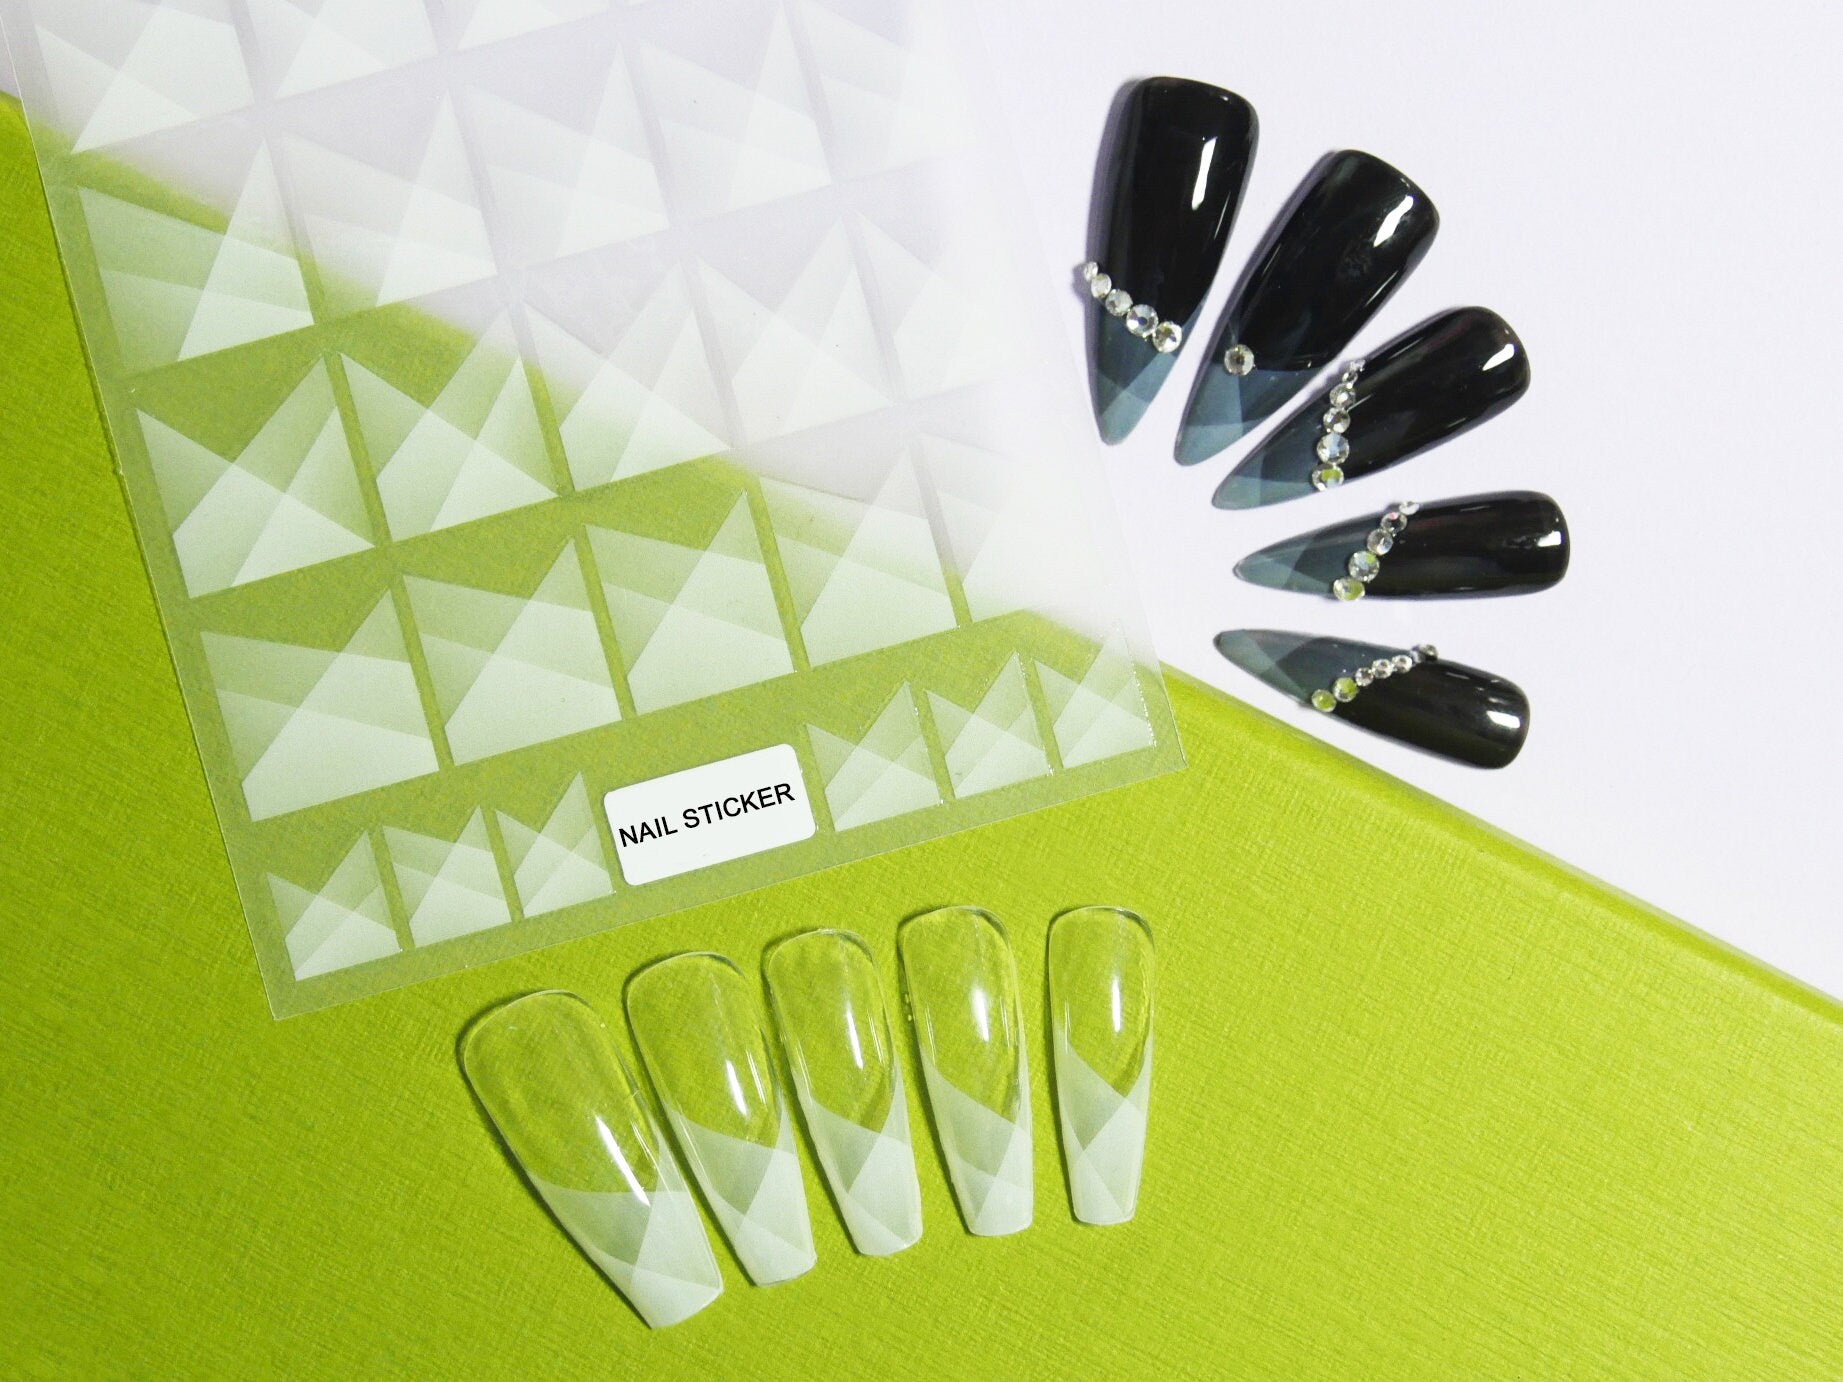 Translucent White Superimposed French Tip Nail Art Sticker